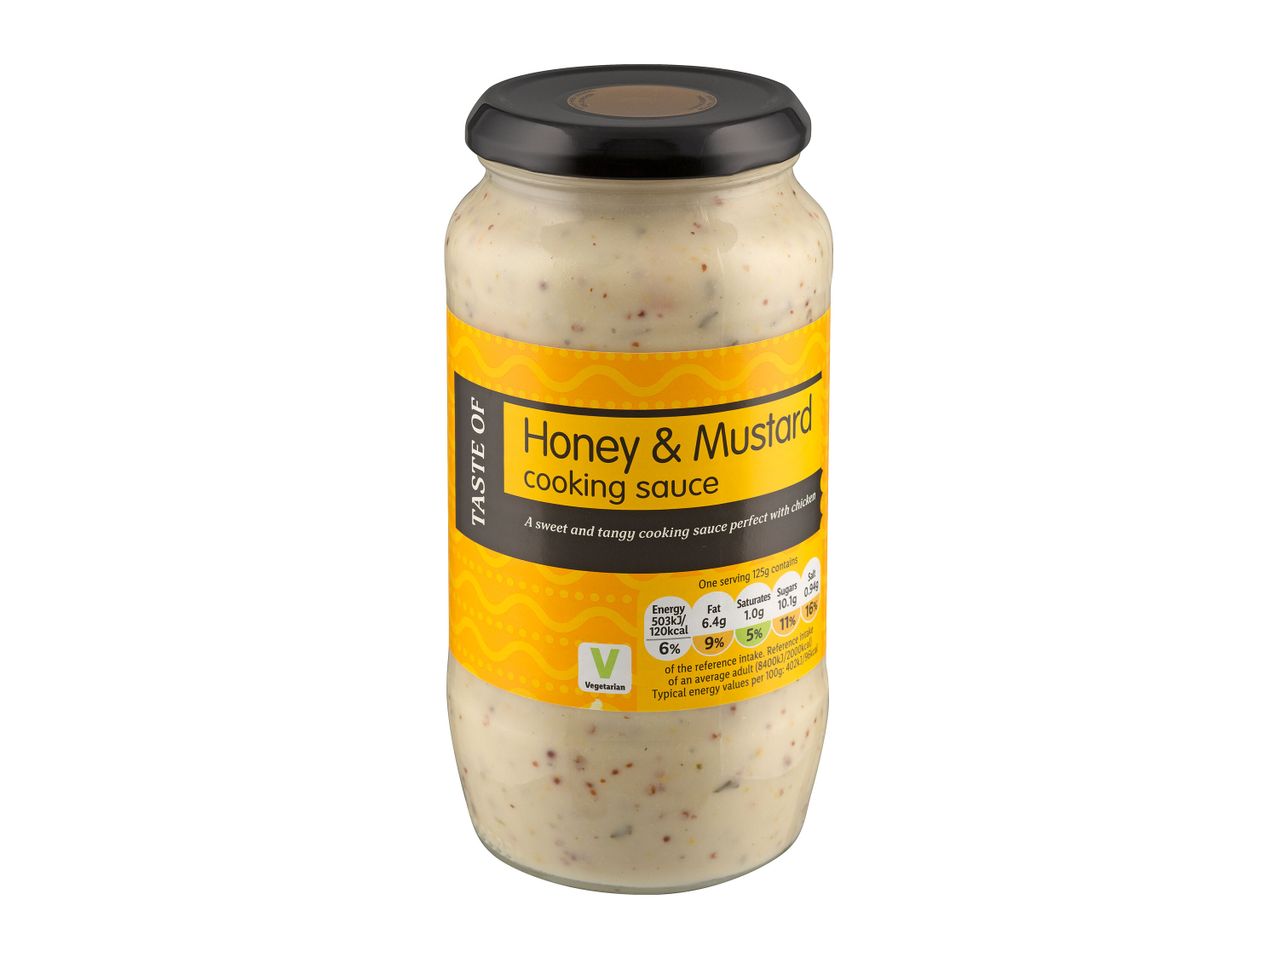 Go to full screen view: Taste of Honey & Mustard Cooking Sauce - Image 1